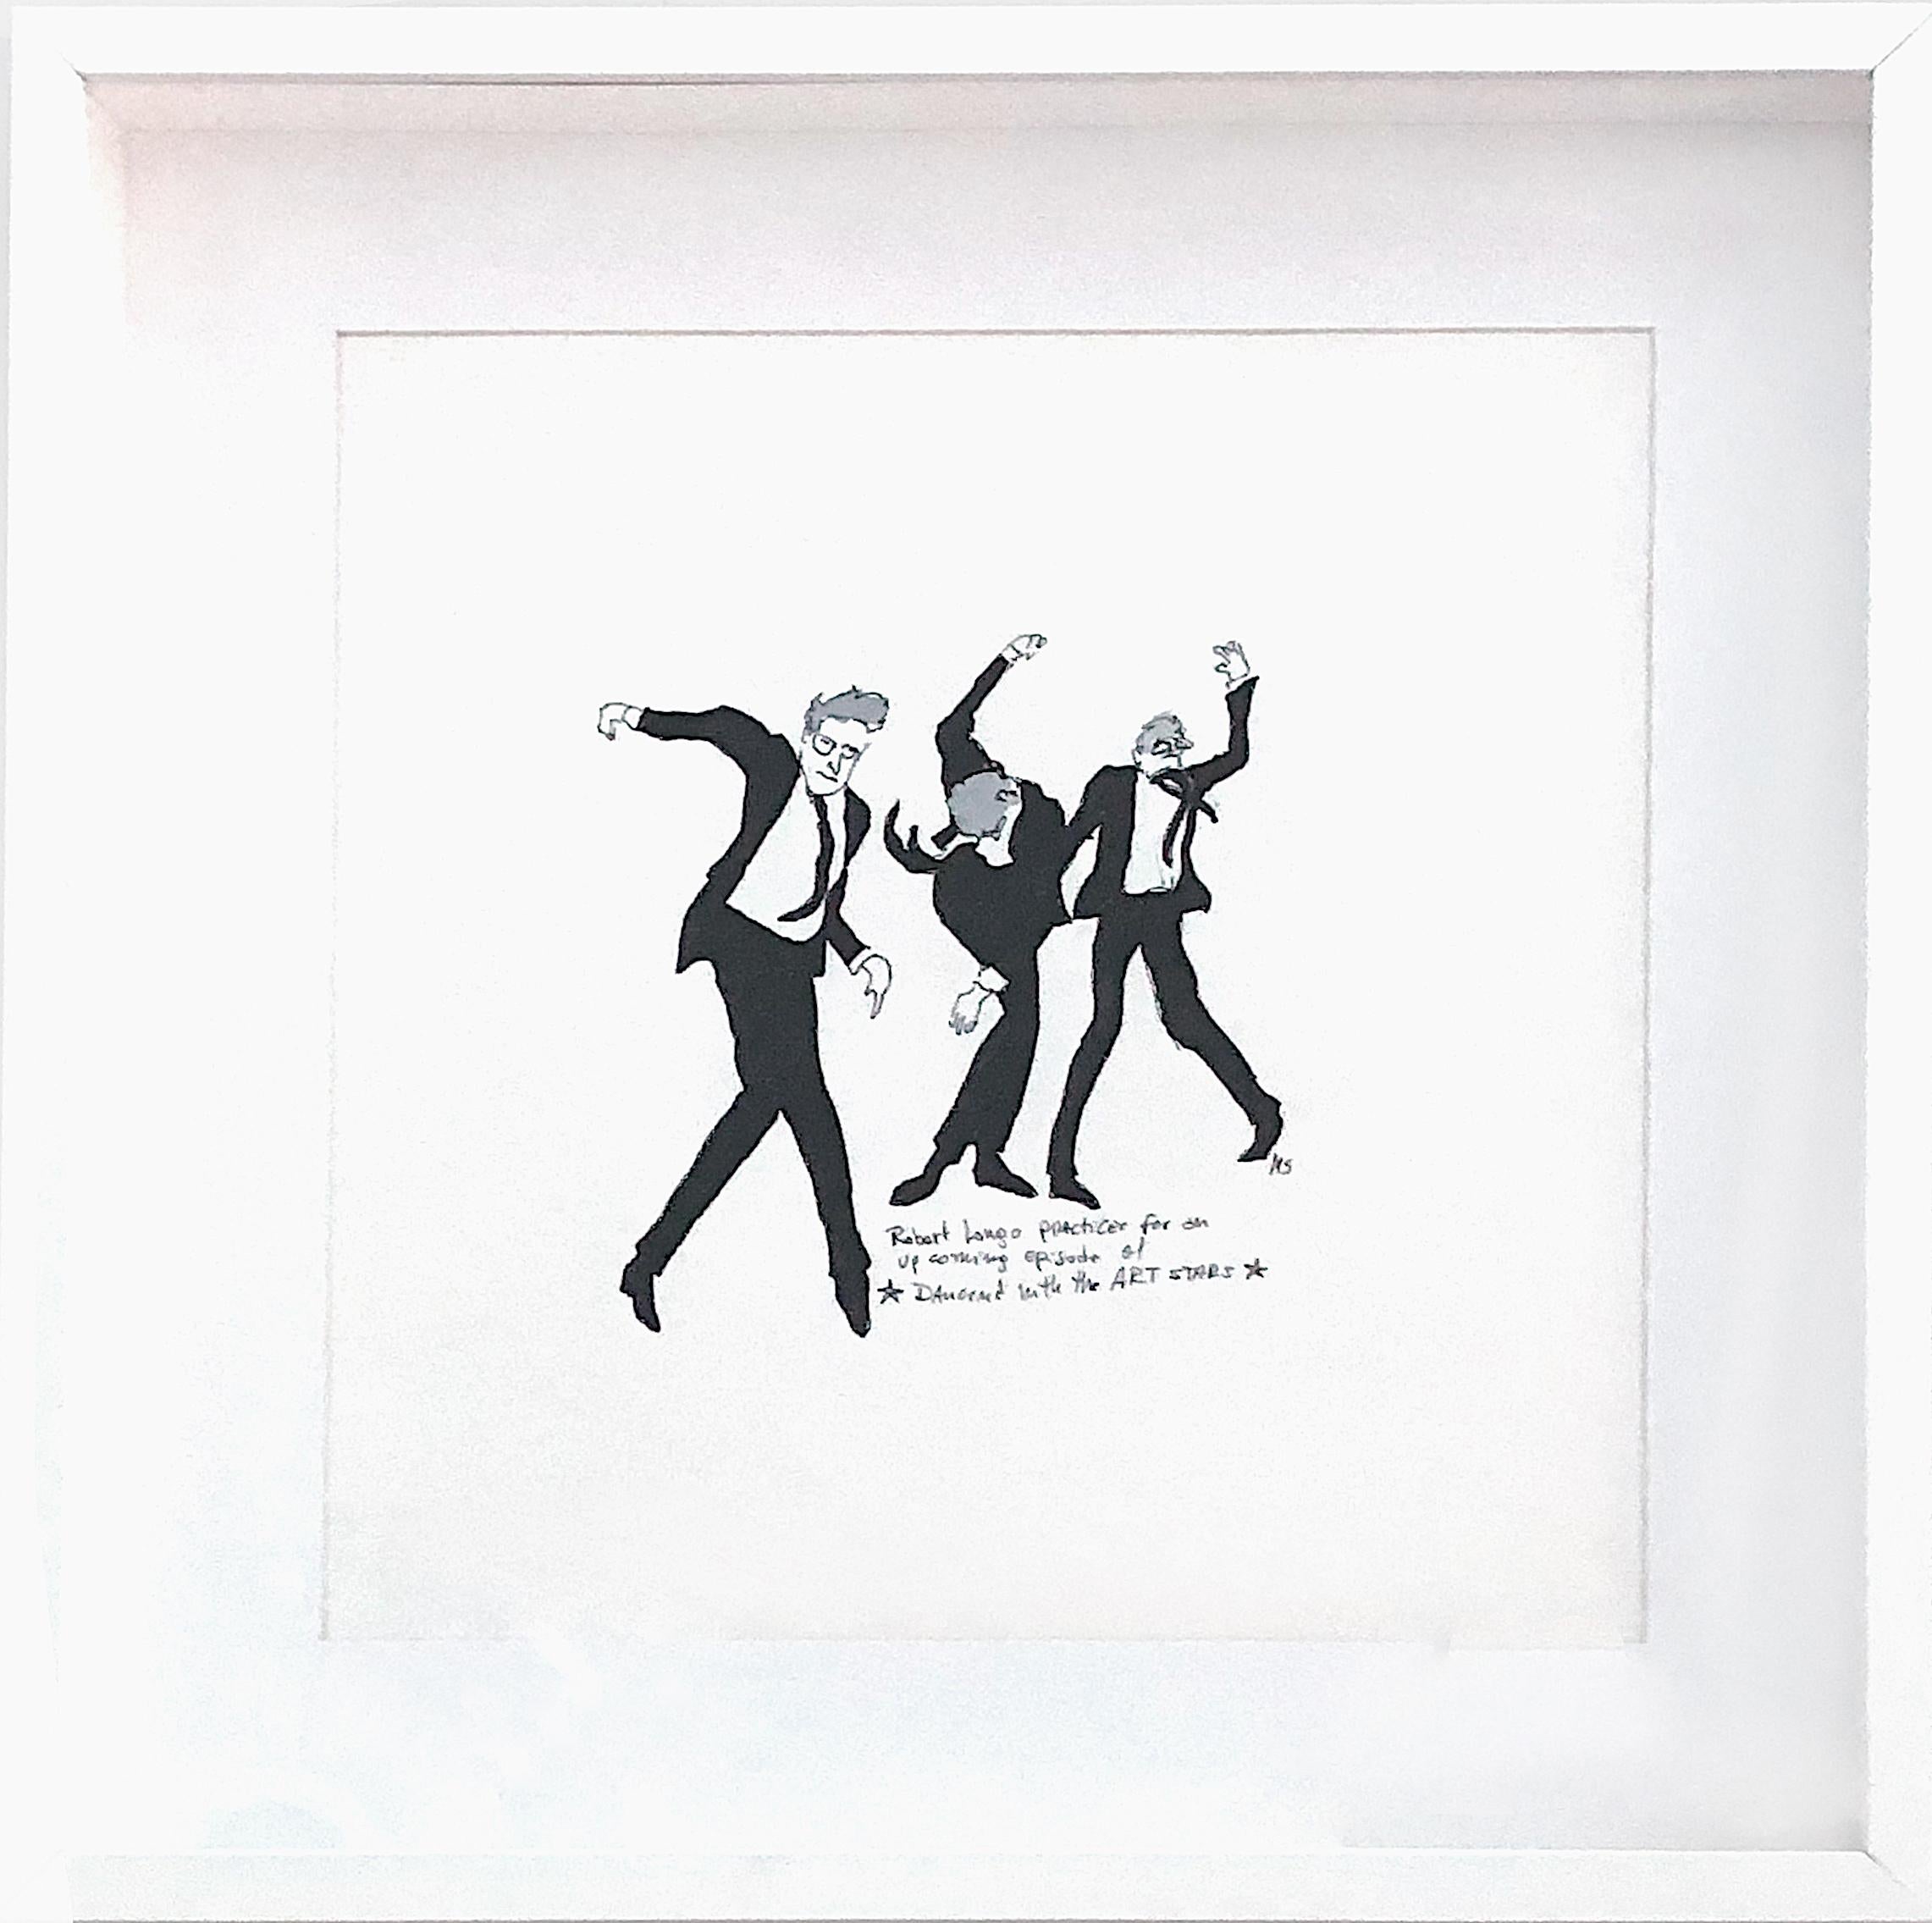 Men from The Art World Series by Manuel Santelices
Watercolor, Gouache and Ink on Archival Paper
All works are one of a kind and framed
Signed by the artist
6 works in total: 'Robert Longo Dances', 'Happy Hour at David LaChapelle', 'Jeff Koons Doing